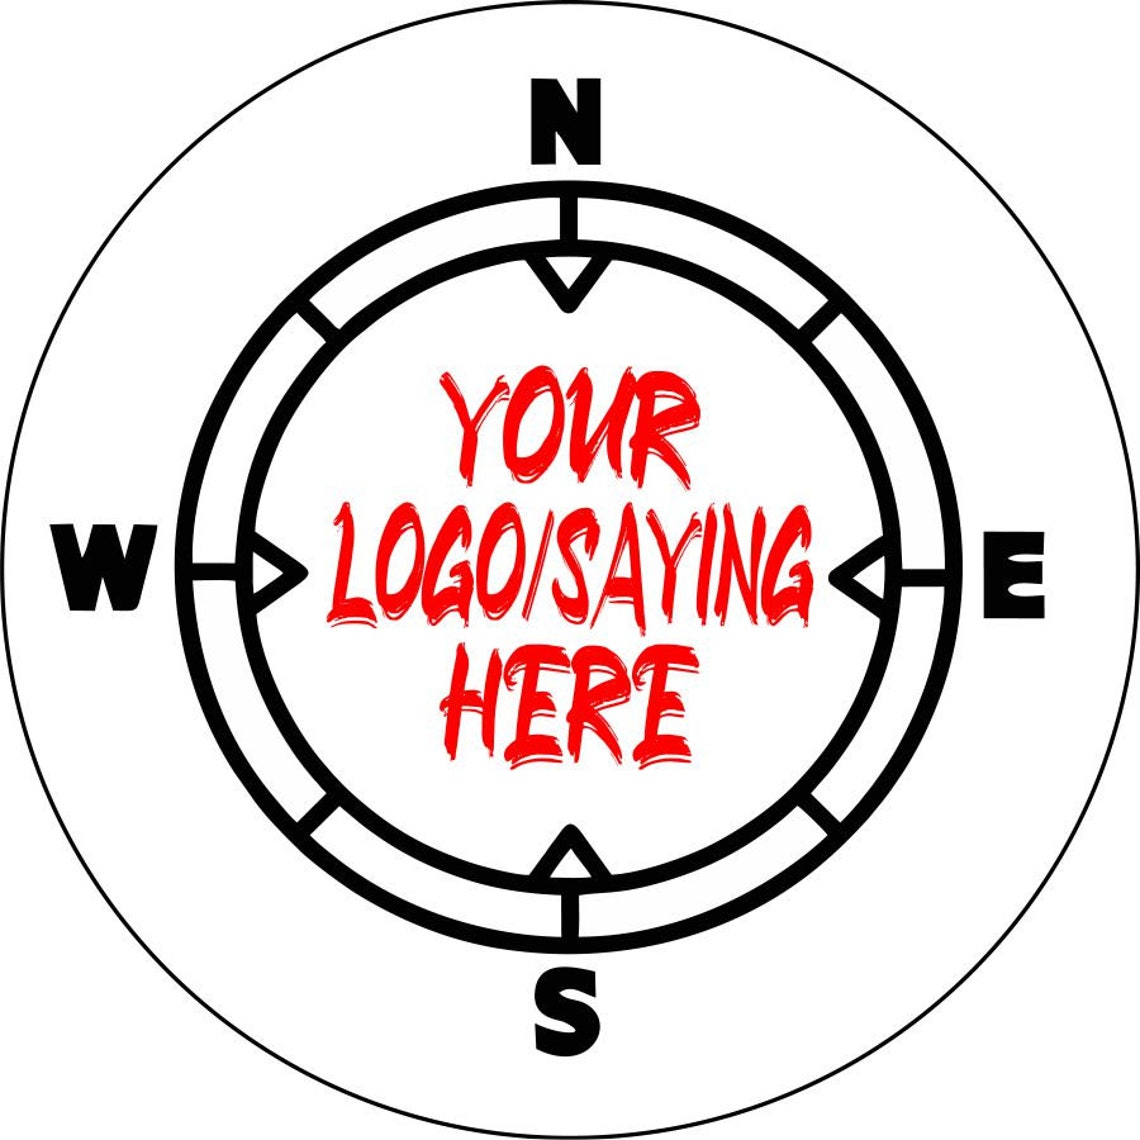 Compass With Your Saying or Logo Custom Spare Tire Cover